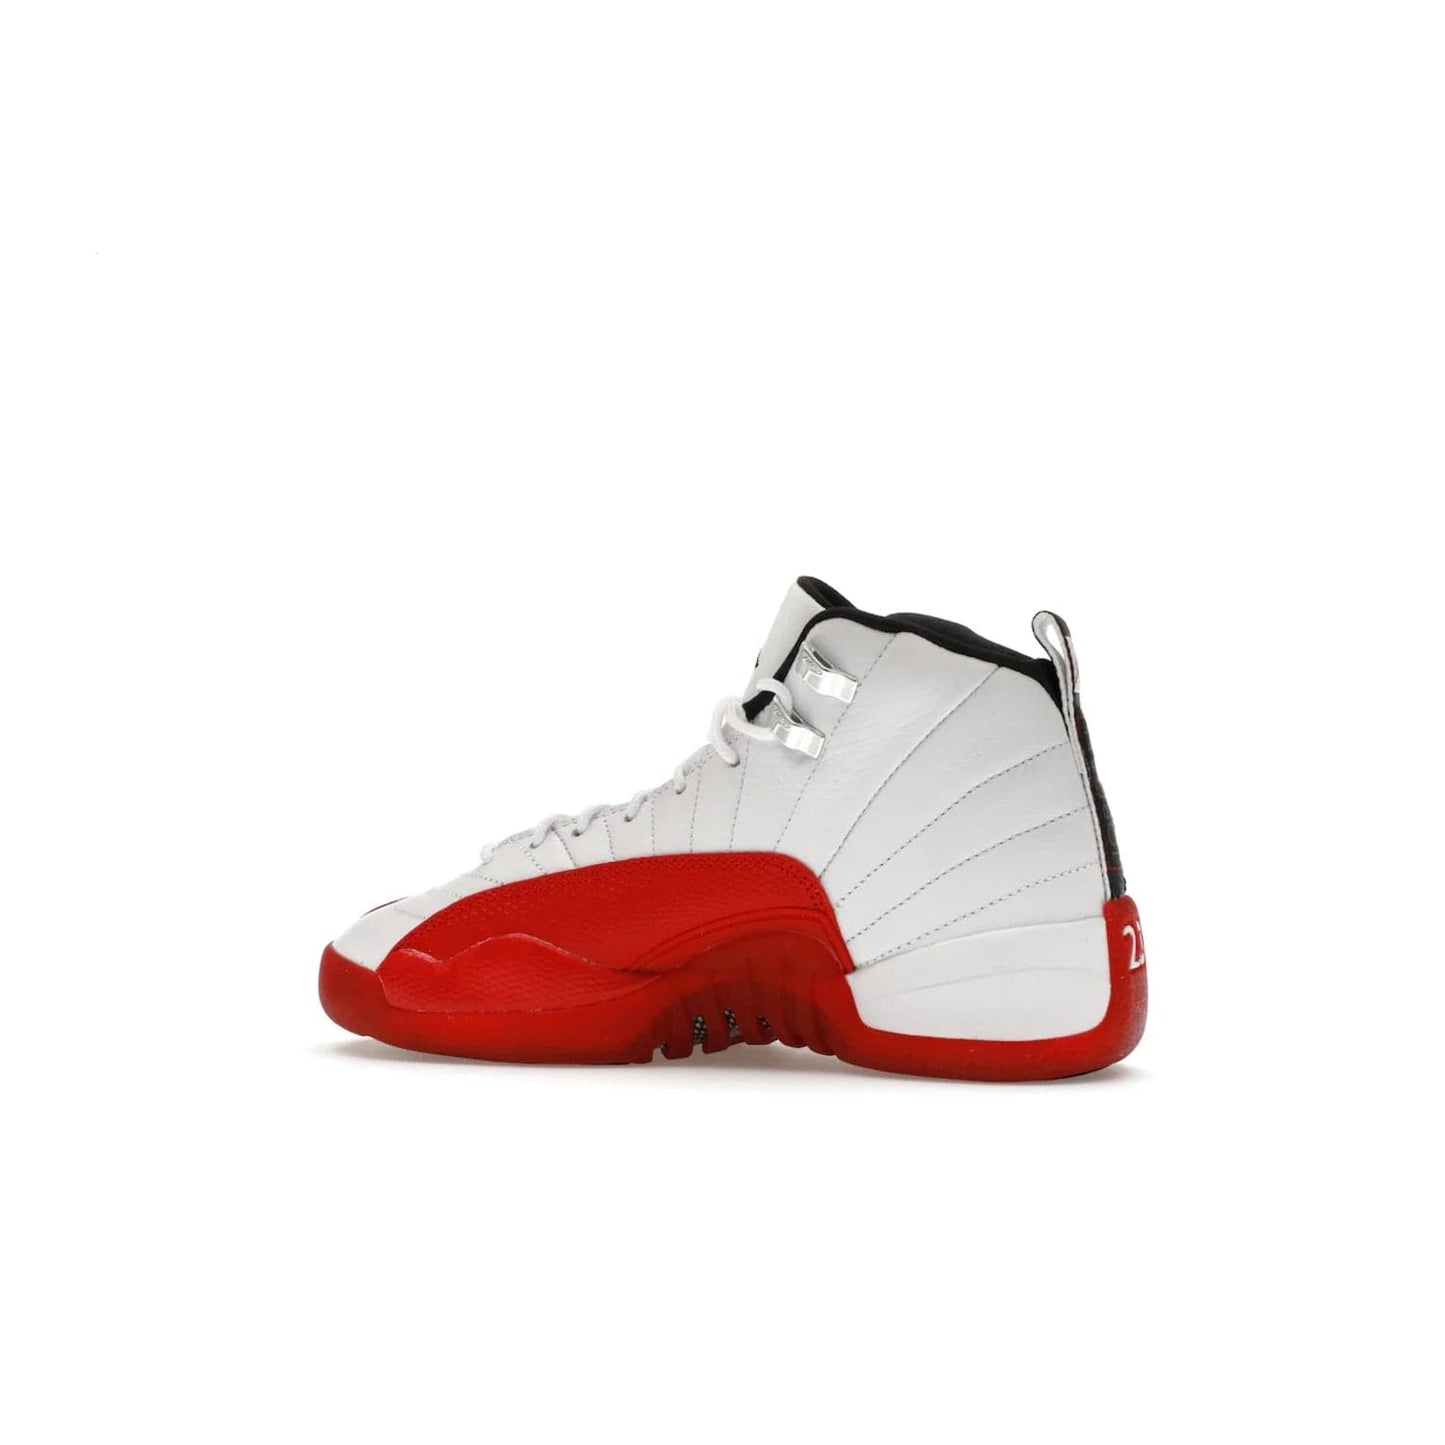 Jordan 12 Retro Cherry (2023) (GS) - Image 21 - Only at www.BallersClubKickz.com - Grab the Jordan 12 Retro Cherry (2023) (GS) and show off your signature style with these iconic kicks. Dressed in White, Black and Varsity Red, these timeless kicks are sure to turn heads. Available October 28, 2023.